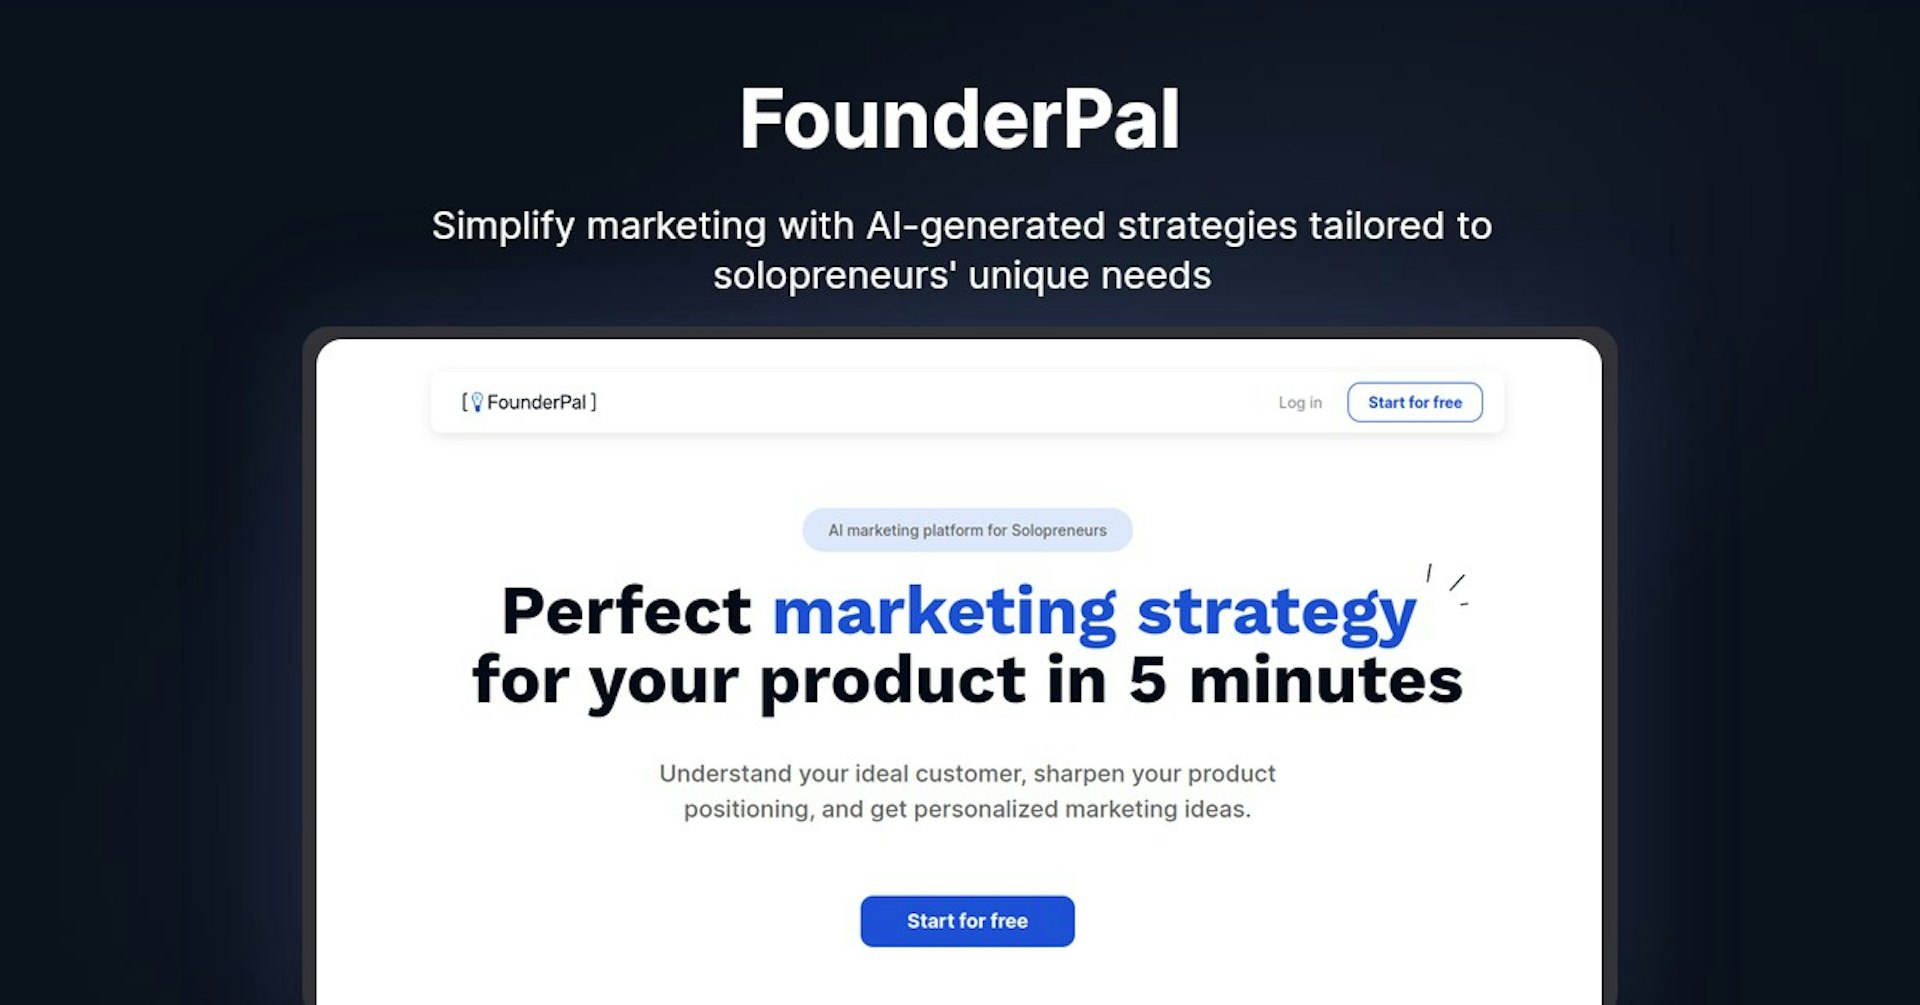 FounderPal